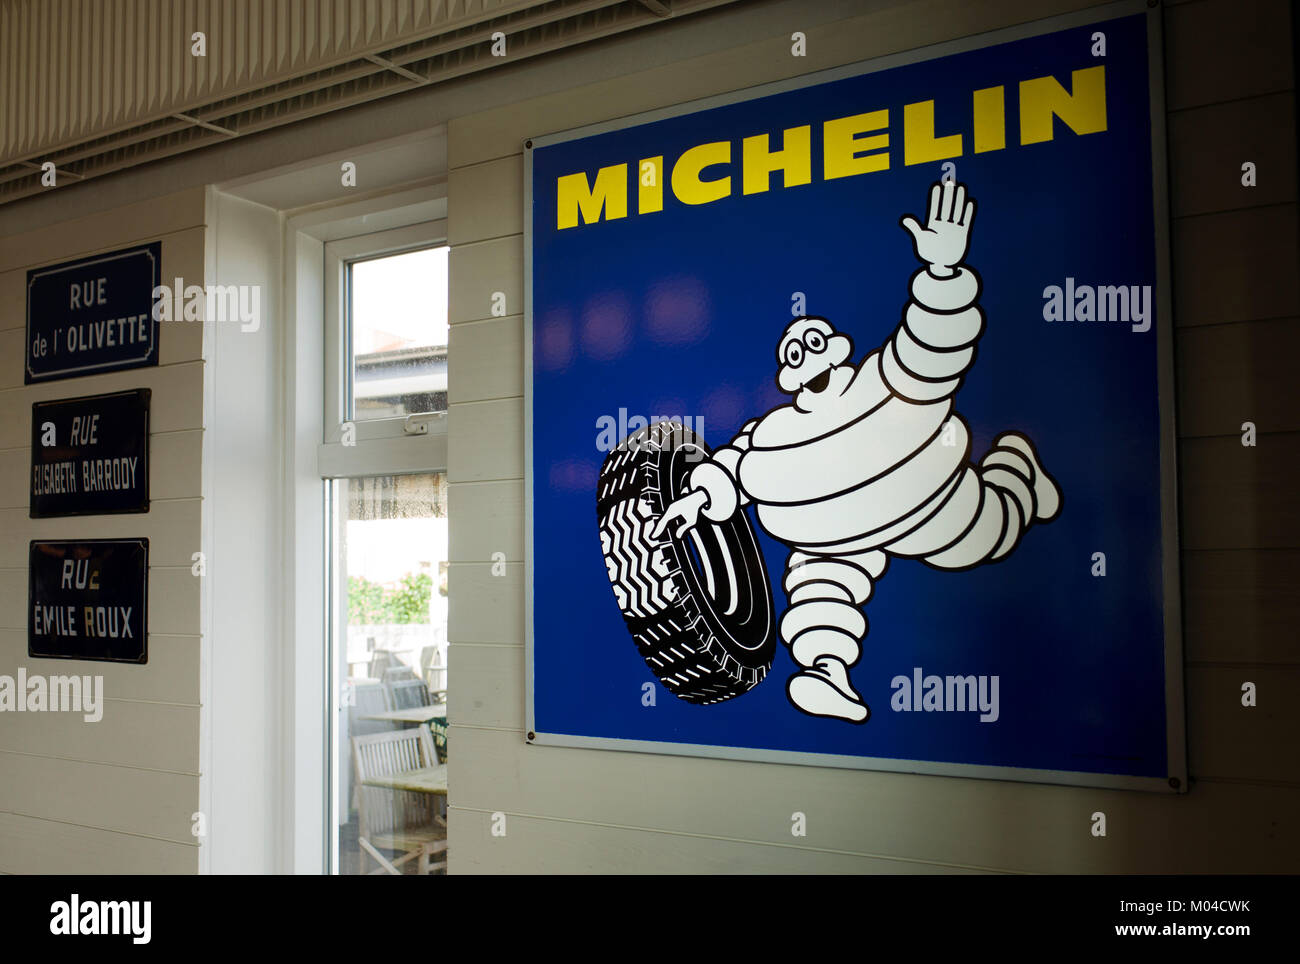 Michelin tyres metal sign Stock Photo